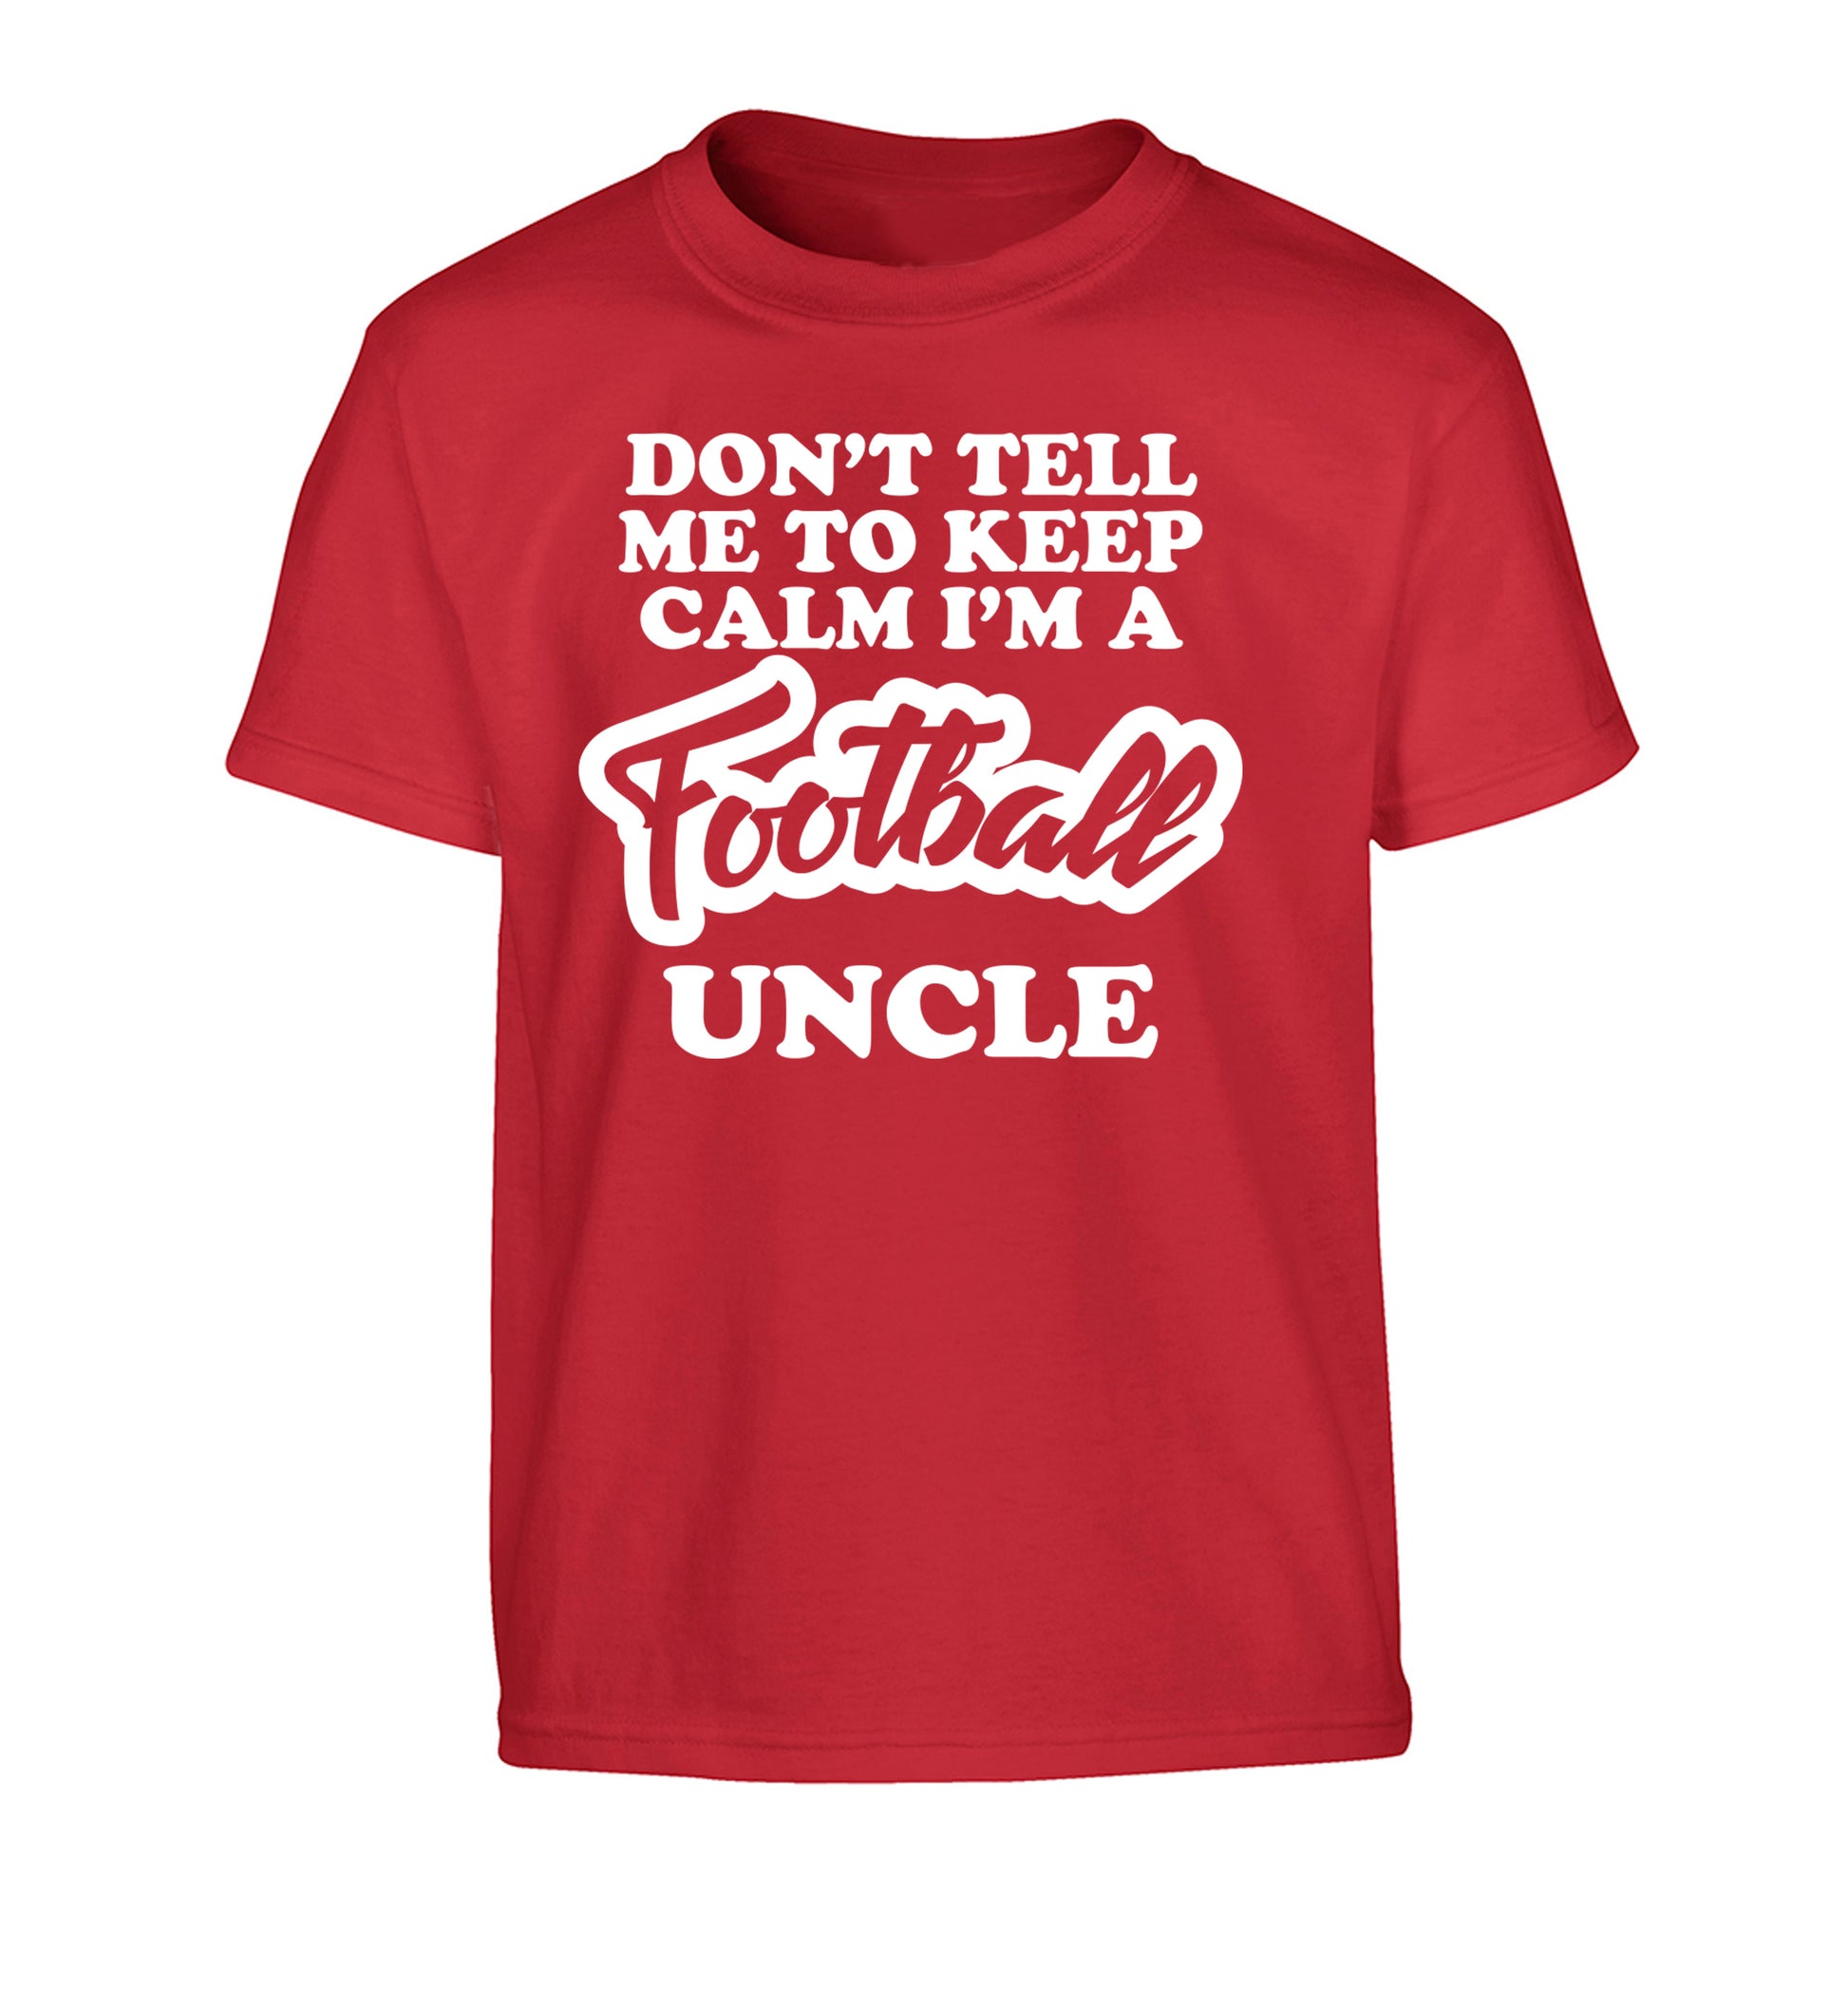 Don't tell me to keep calm I'm a football uncle Children's red Tshirt 12-14 Years